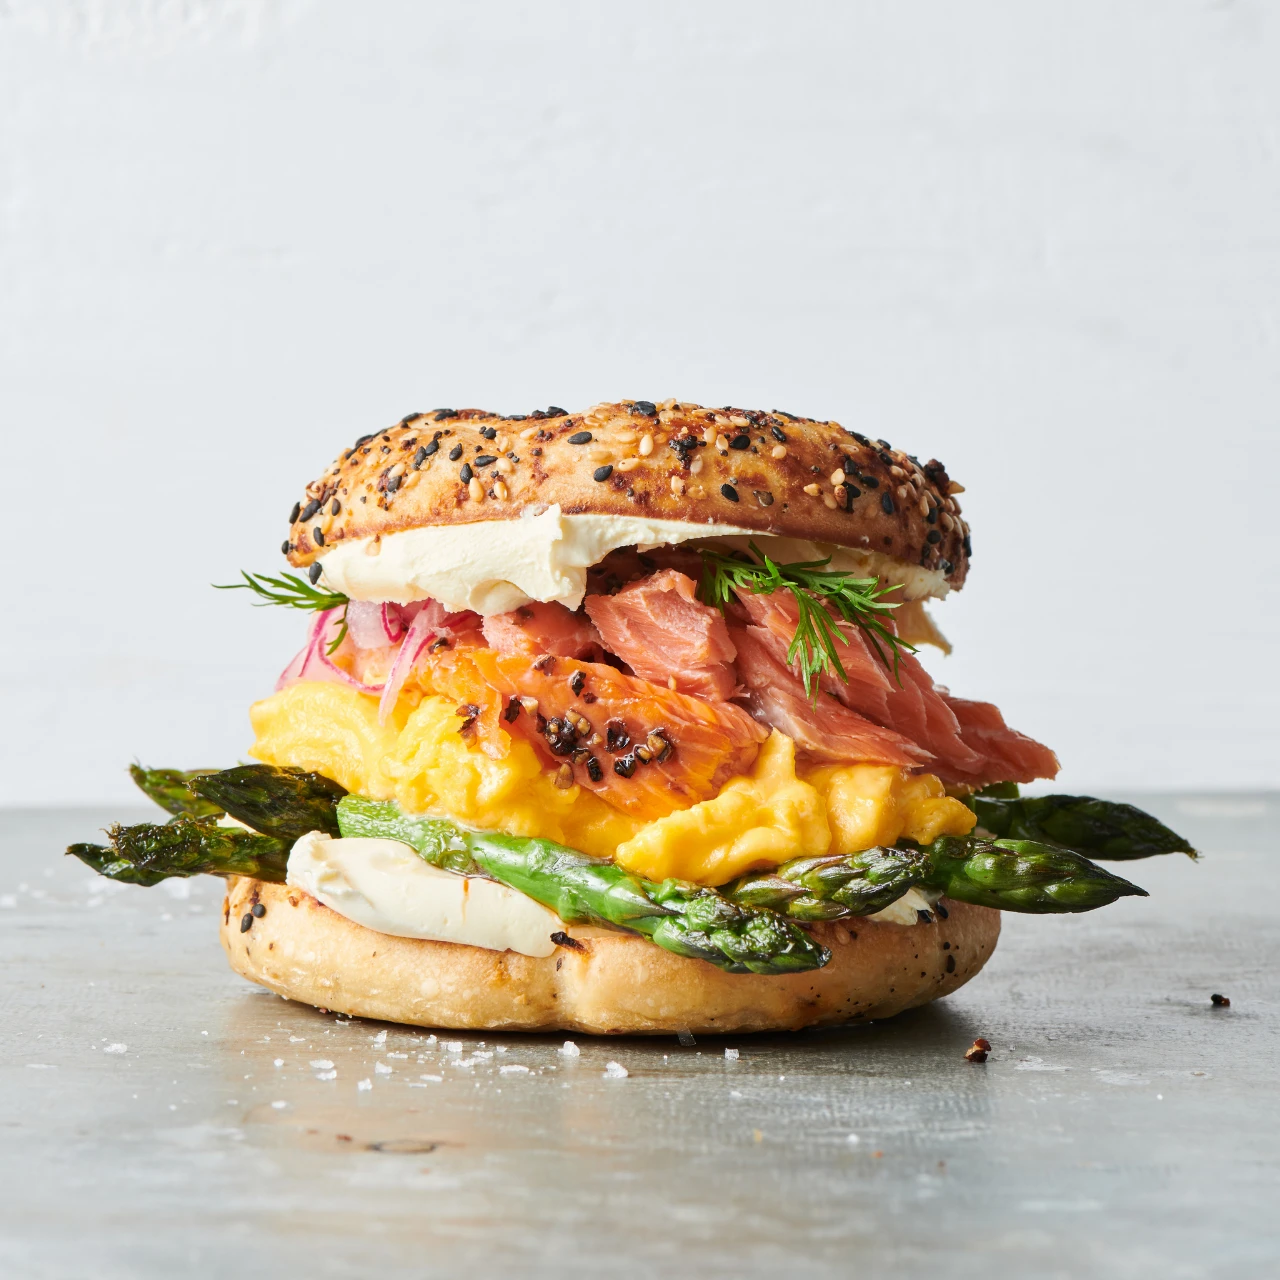 Loaded Smoked Salmon Bagel Recipe With Sanford and Sons Hot Smoked Salmon, Creamy Eggs, Aspargus and Rocket.